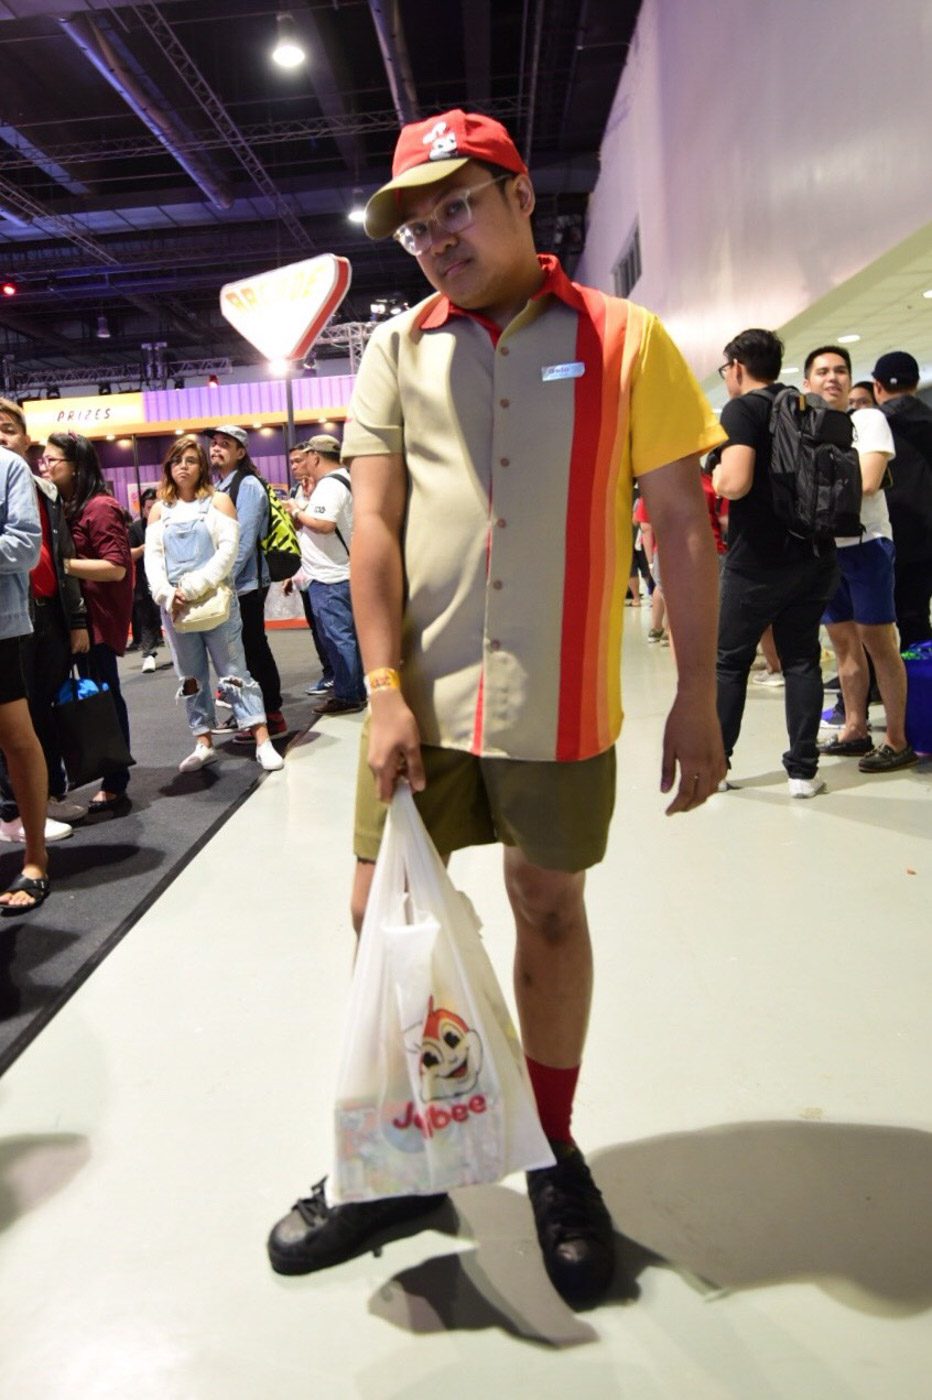 NOT ALL HEROES WEAR CAPES. Jollibee fan Gelo cosplays as a server at the fastfood chain.  